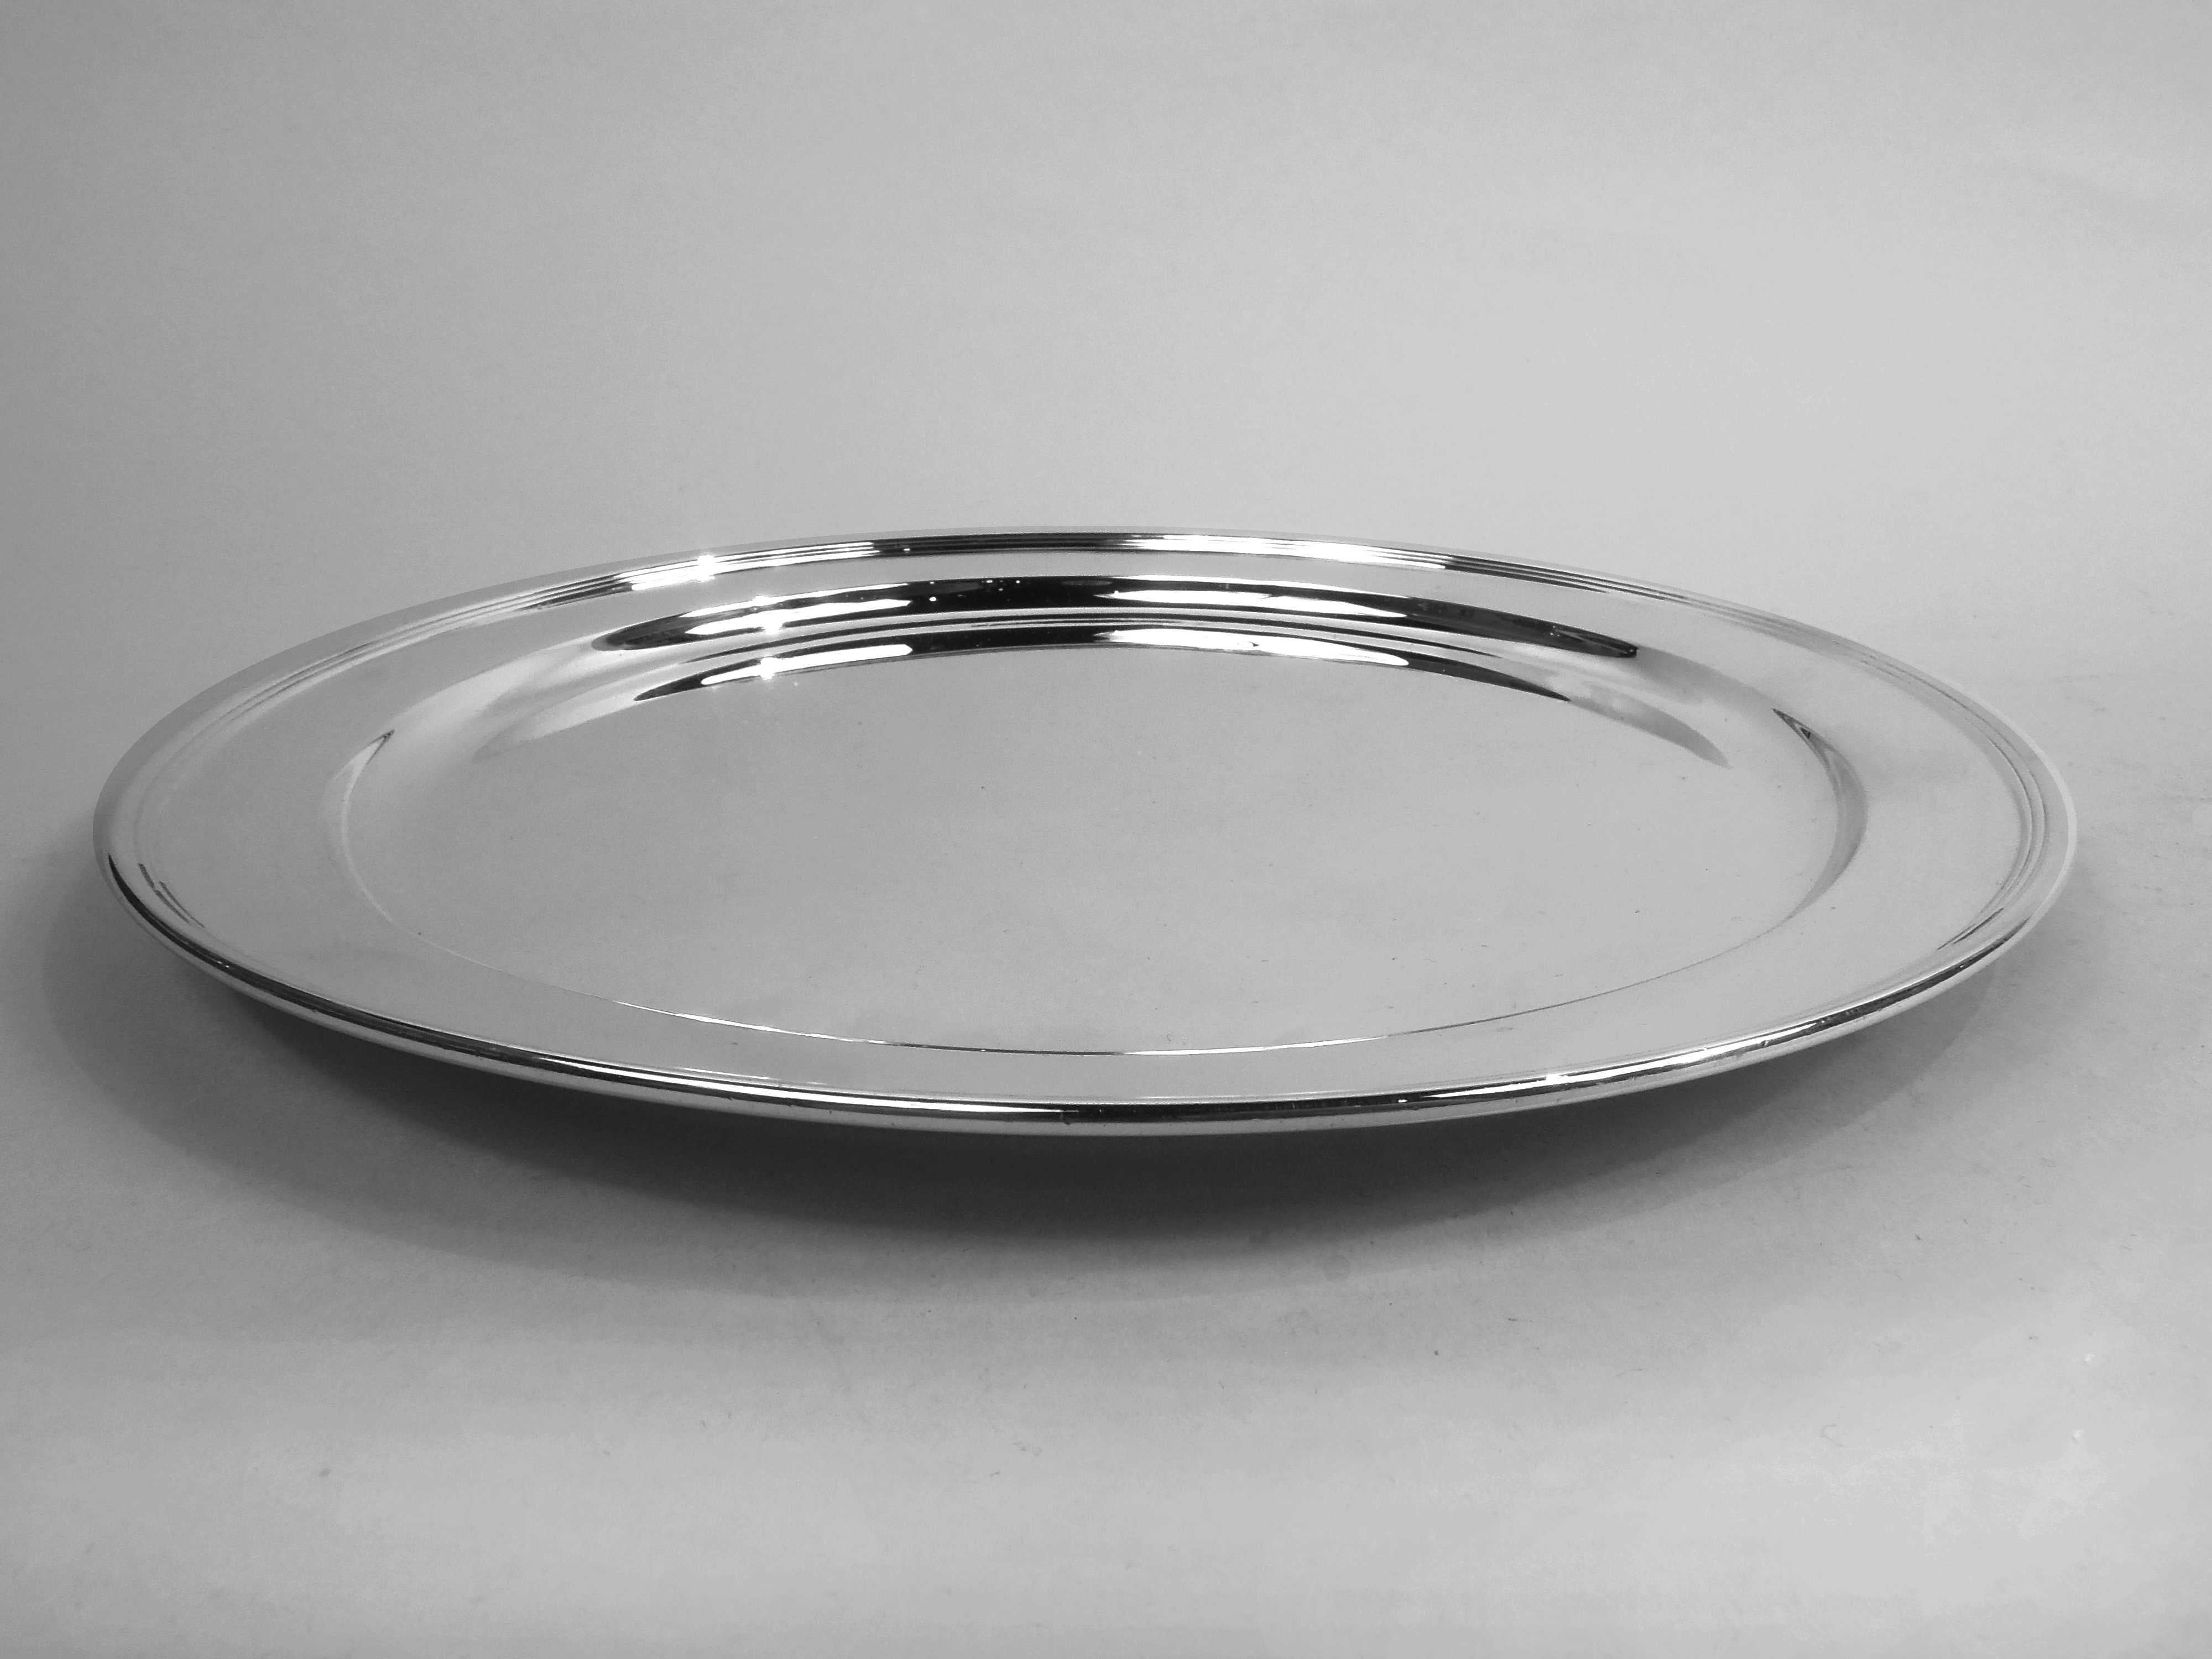 Modern sterling silver tray. Made by Tiffany & Co. in New York, ca 1915. Round with tapering shoulder and reeded rim. Fully marked including maker’s stamp, pattern no. 18975 (first produced in 1915), and director’s letter m. Weight: 18.8 troy